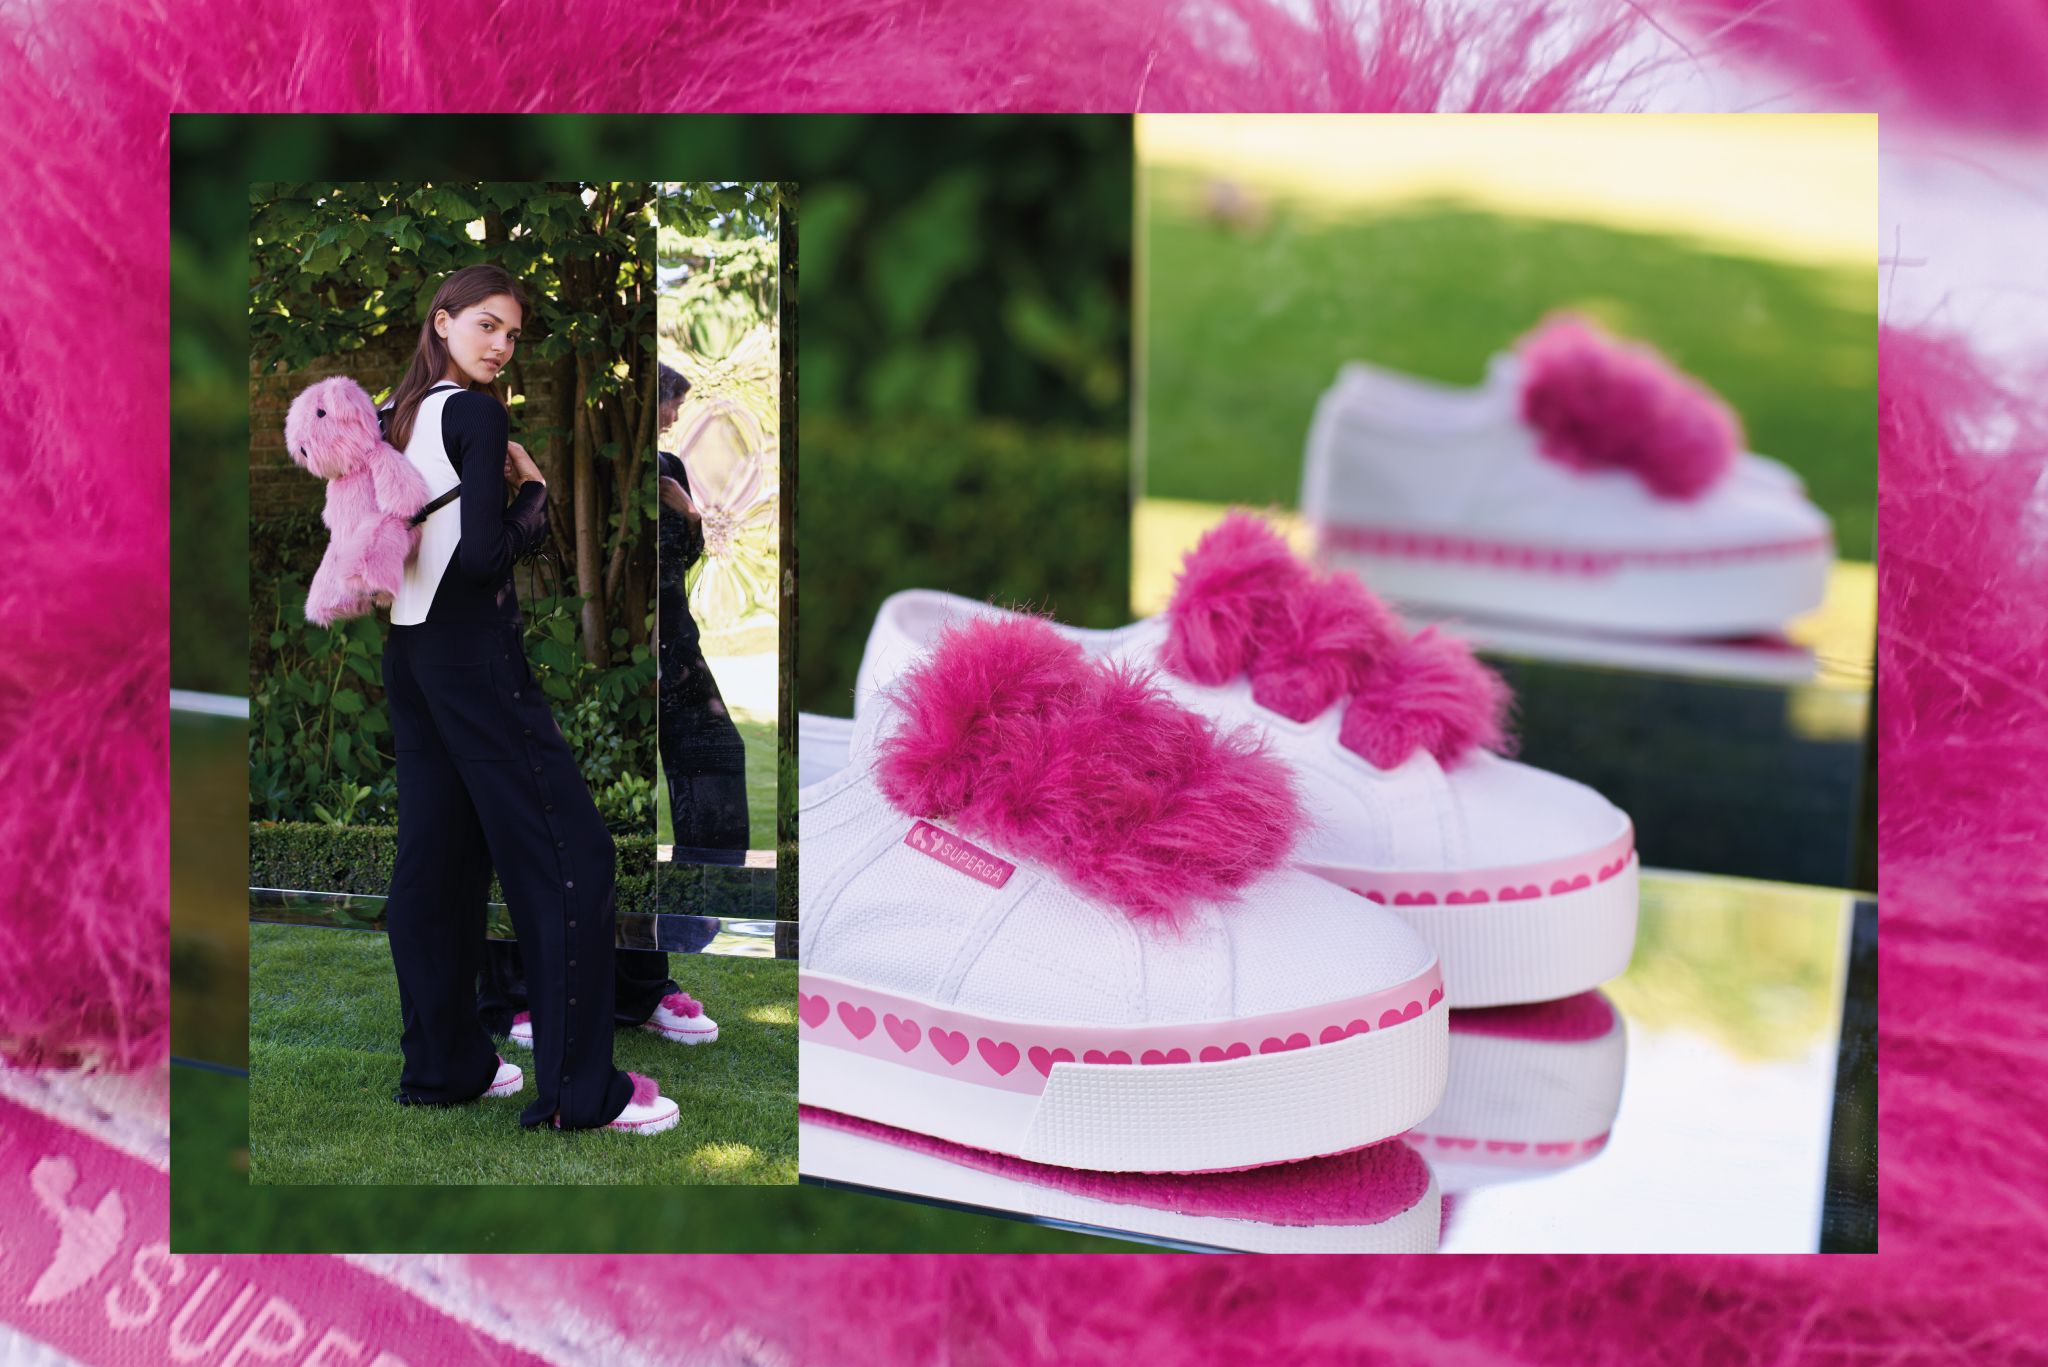 fashion fans are going to freak over these delightfully furry sneakers